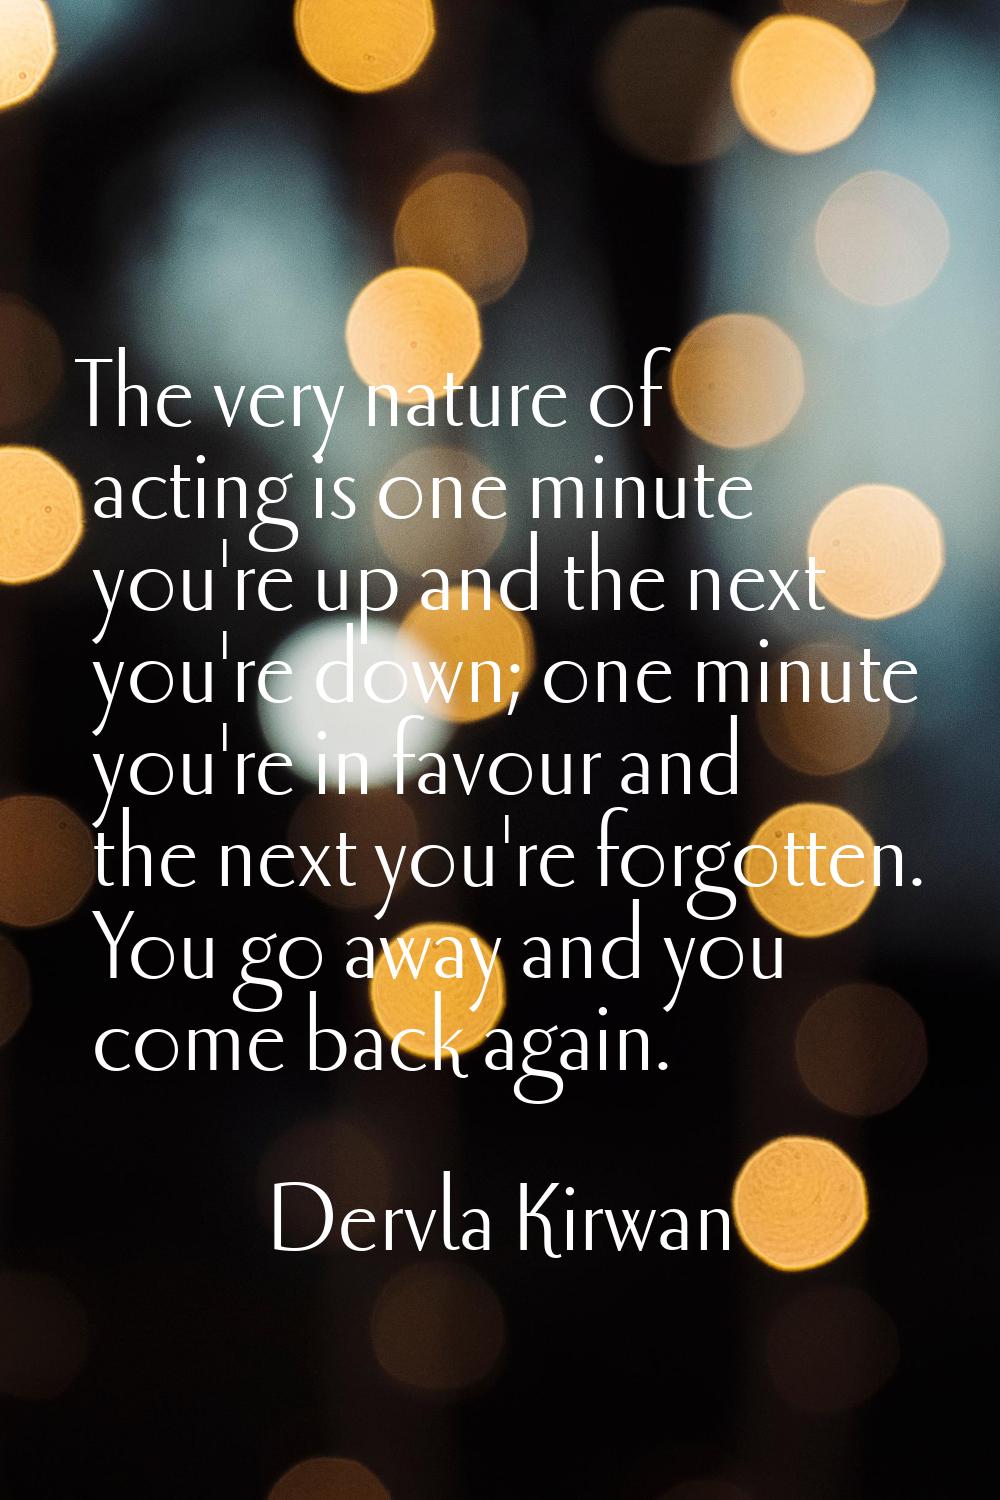 The very nature of acting is one minute you're up and the next you're down; one minute you're in fa